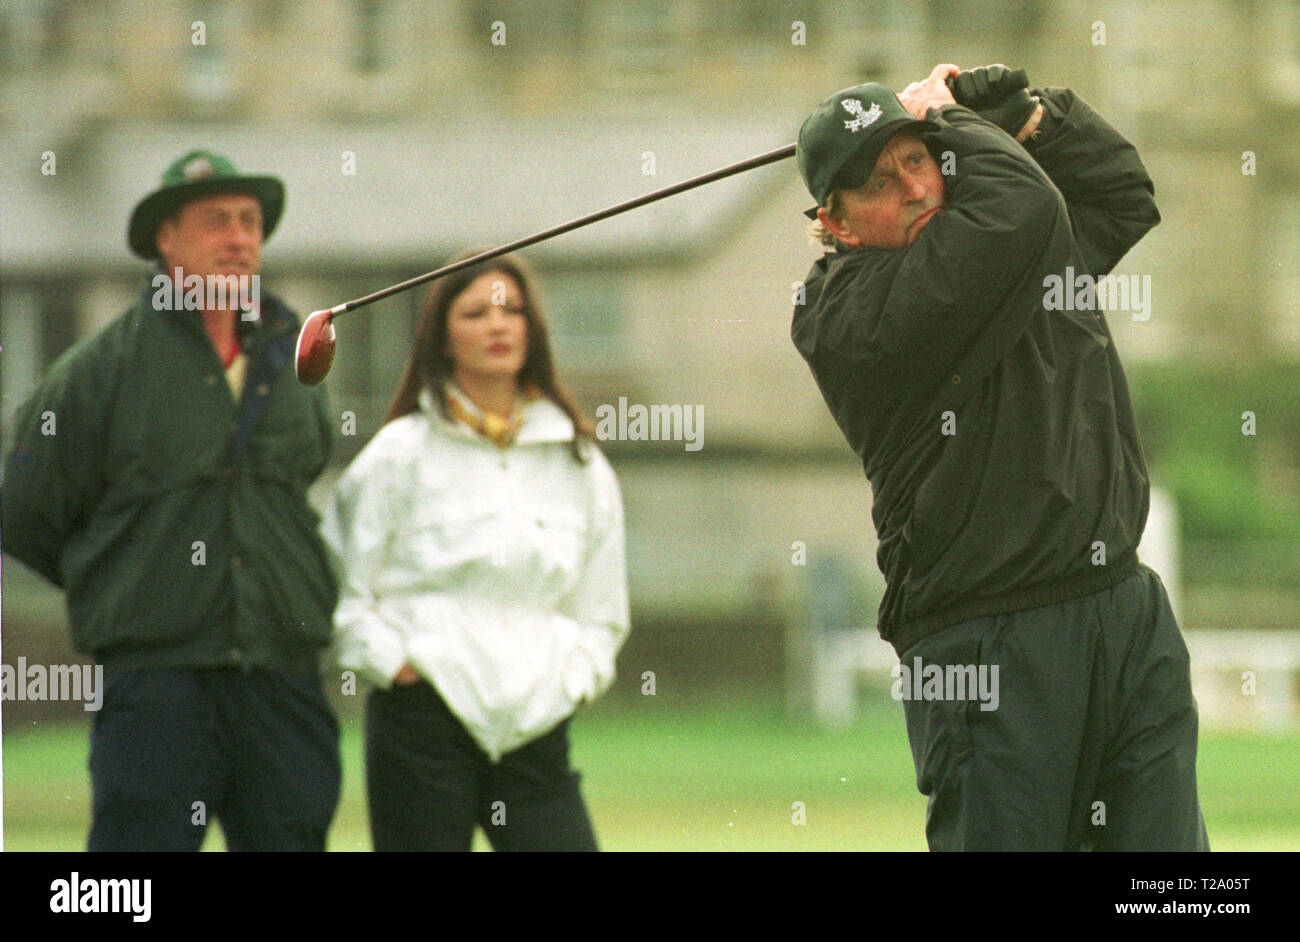 Catherine Zeta-Jones watches husband Michael Douglas tee shot on the 2nd hole at the Old Course, St. Andrews during the actor's round at the annual Dunhill pro-celebrity golf tournament where he partnered Ernie Els. Stock Photo